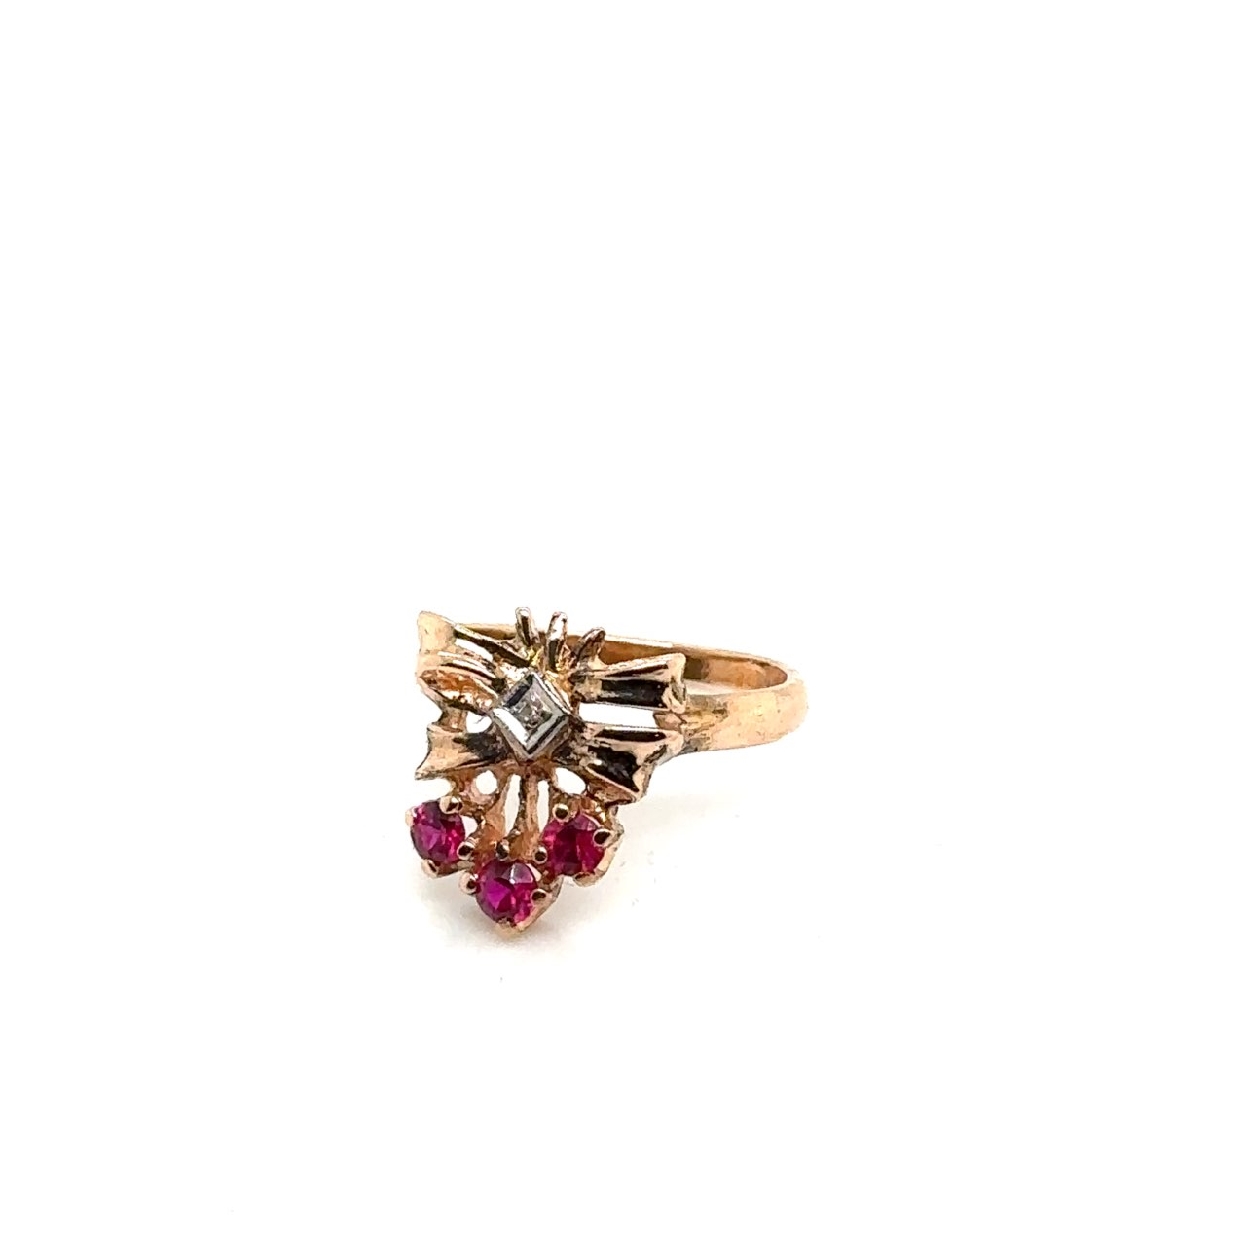 Retro 1940s 14K Rose Gold Bow Ring with Diamonds and Synthetic Rubies Size 6.75